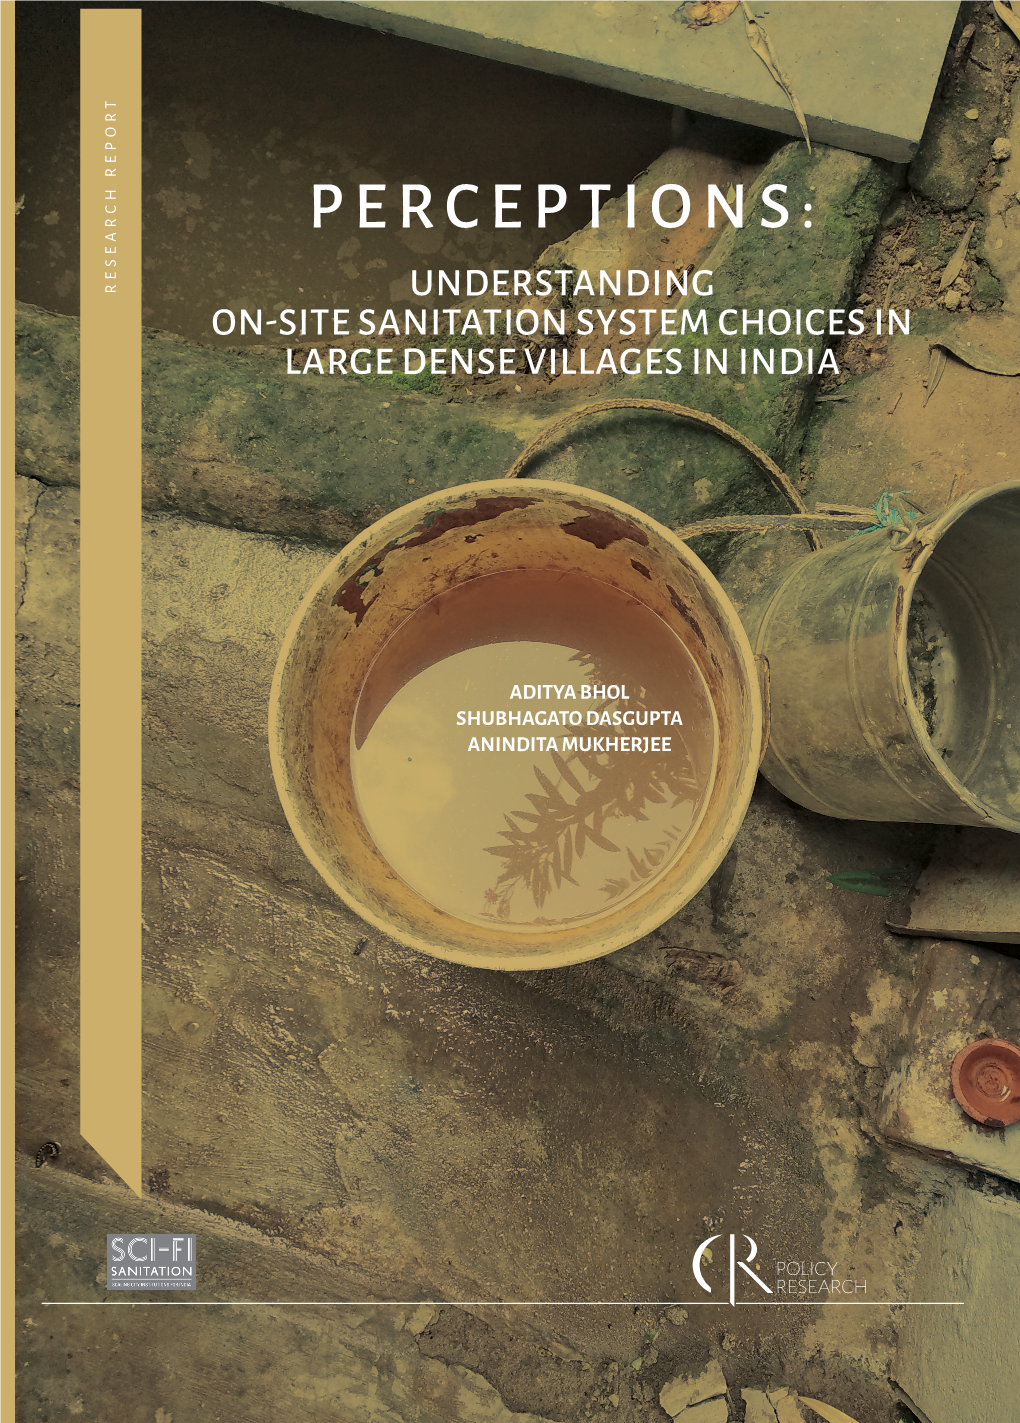 PERCEPTIONS: Understanding On-Site Sanitation System Choices in Large Dense Villages in India